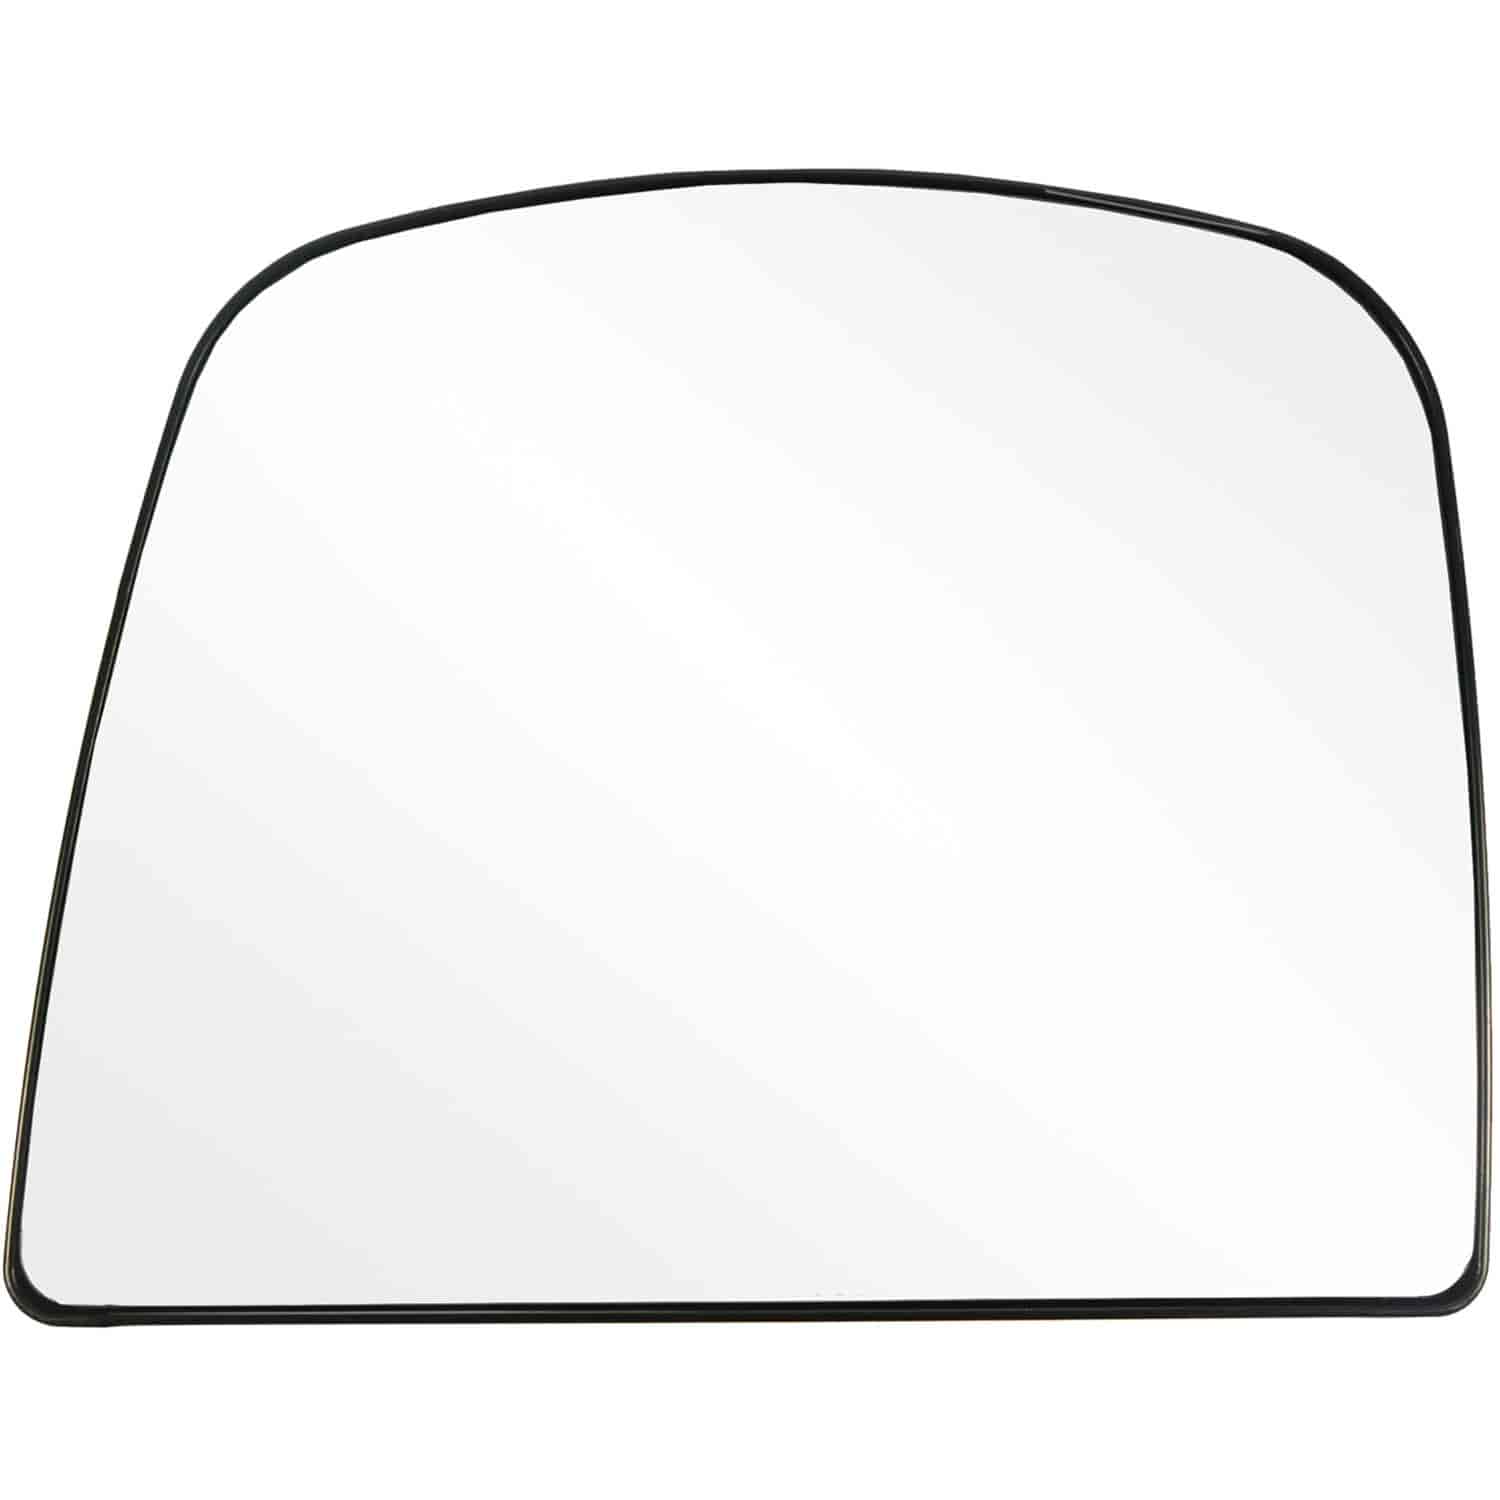 Replacement Glass Assembly for 08-14 Express Full Size Van top lens; 08-14 Savana Full Size Van top